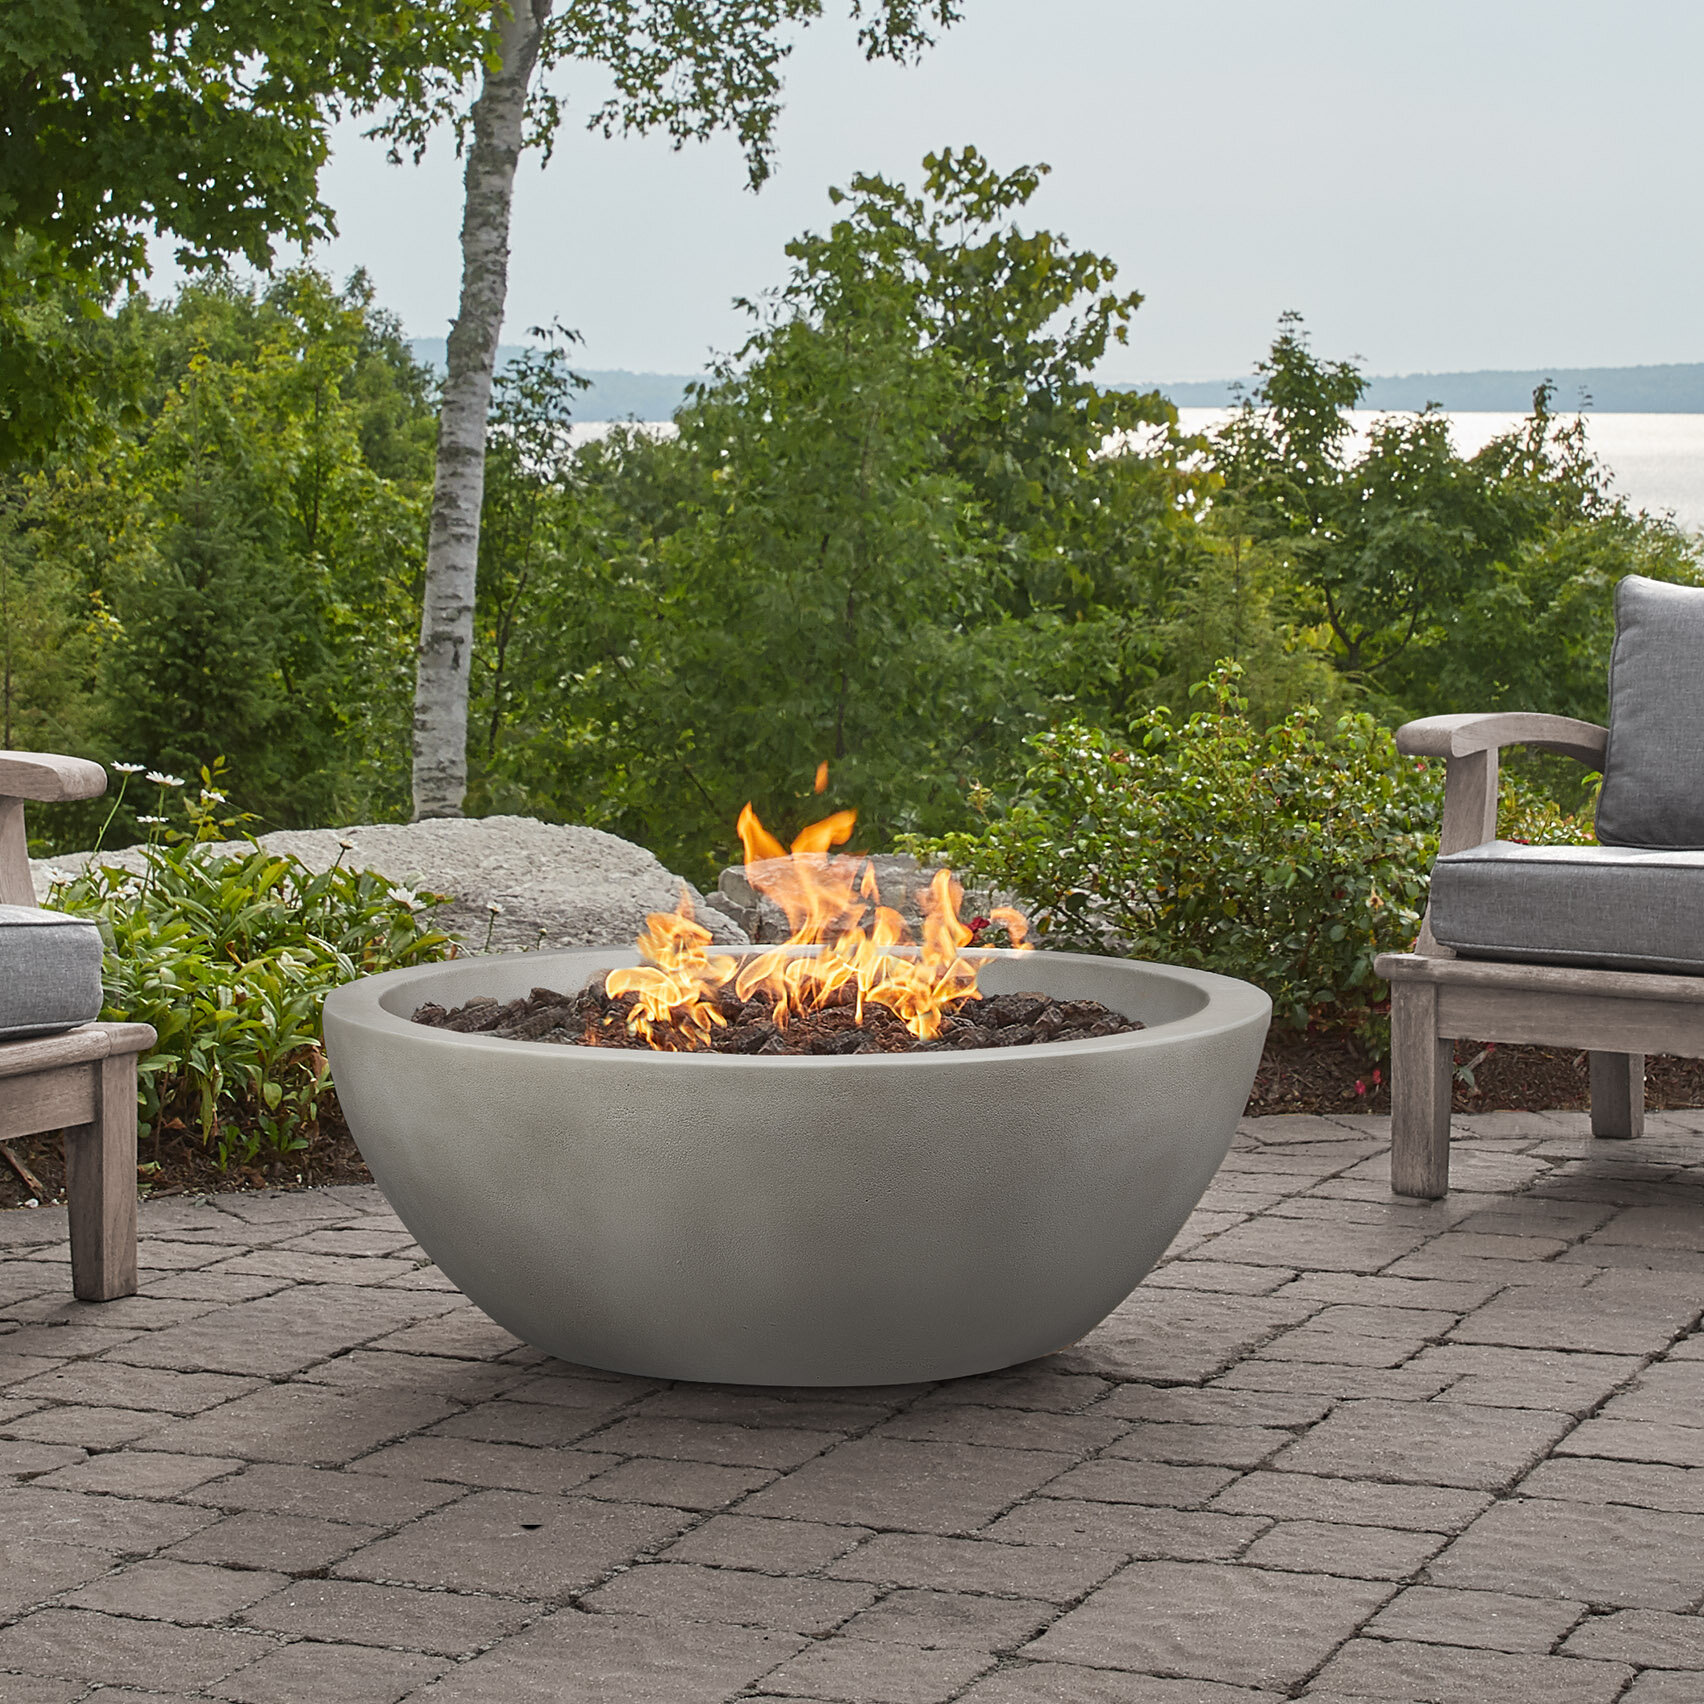 Tips to chose the right concrete gas fire pit bowl.